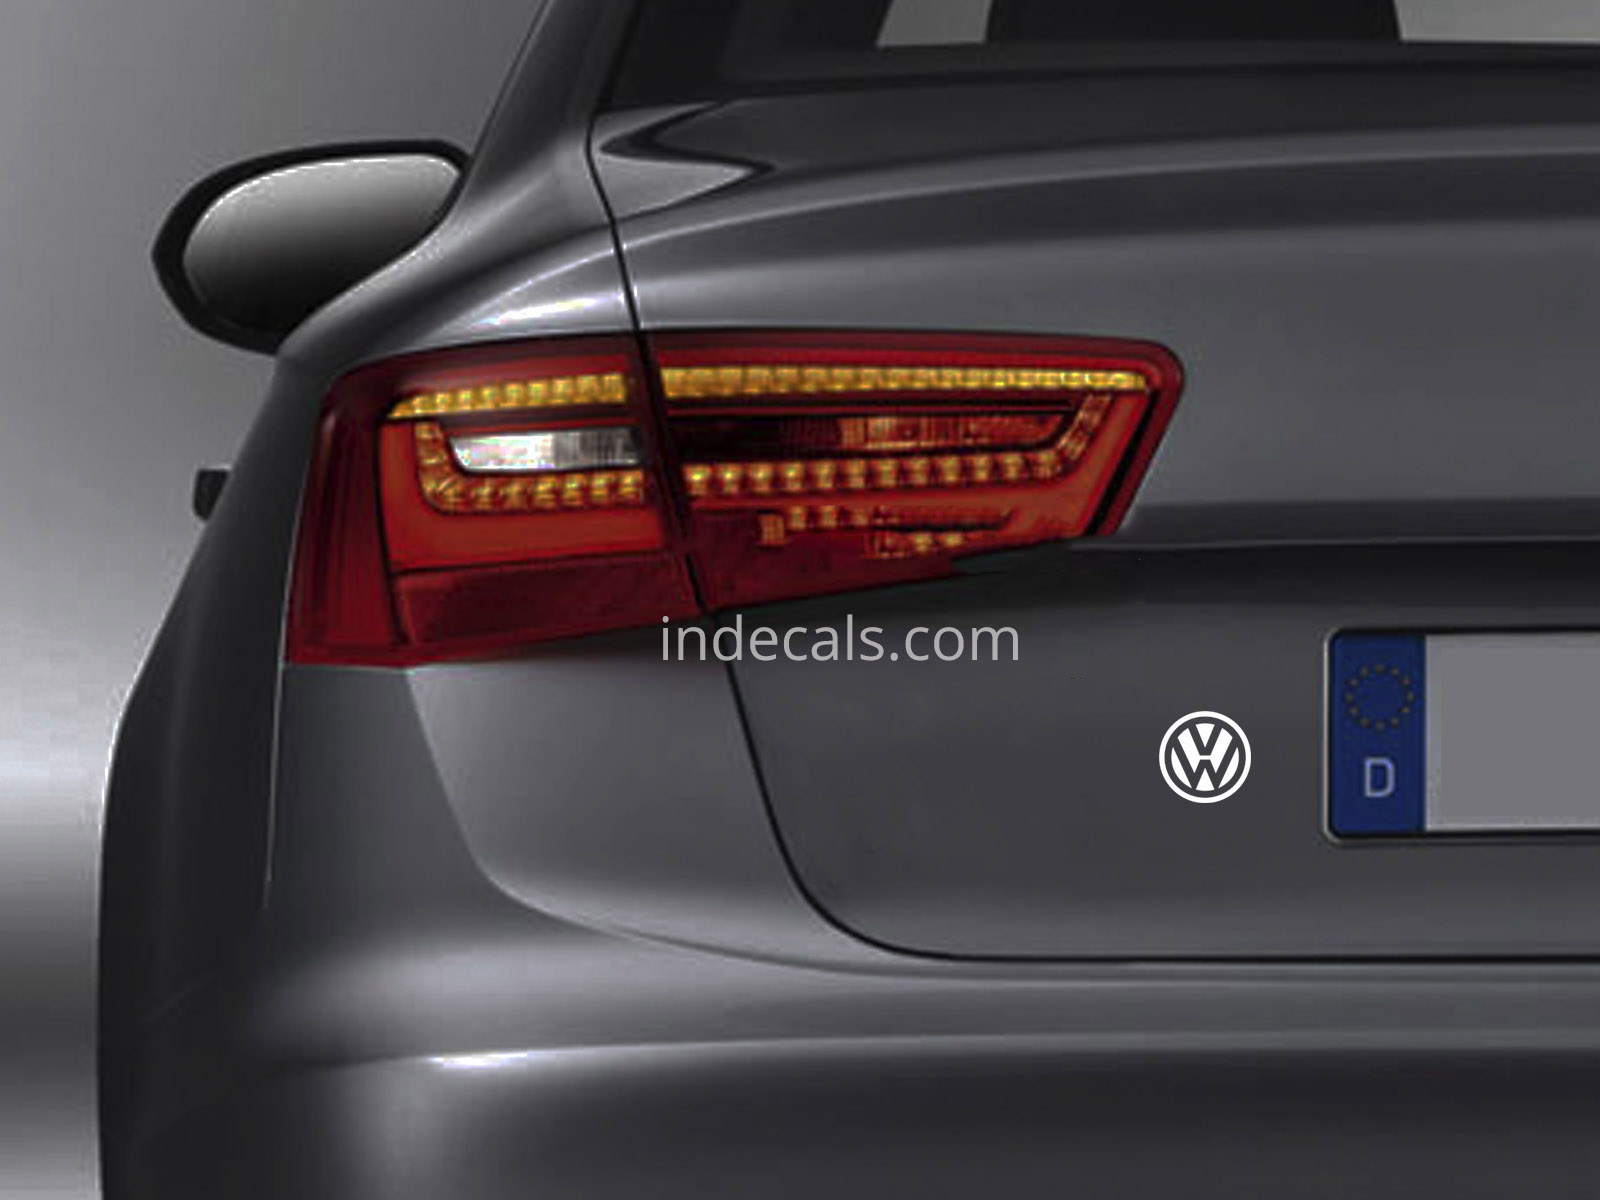 3 x Volkswagen Stickers for Trunk - White